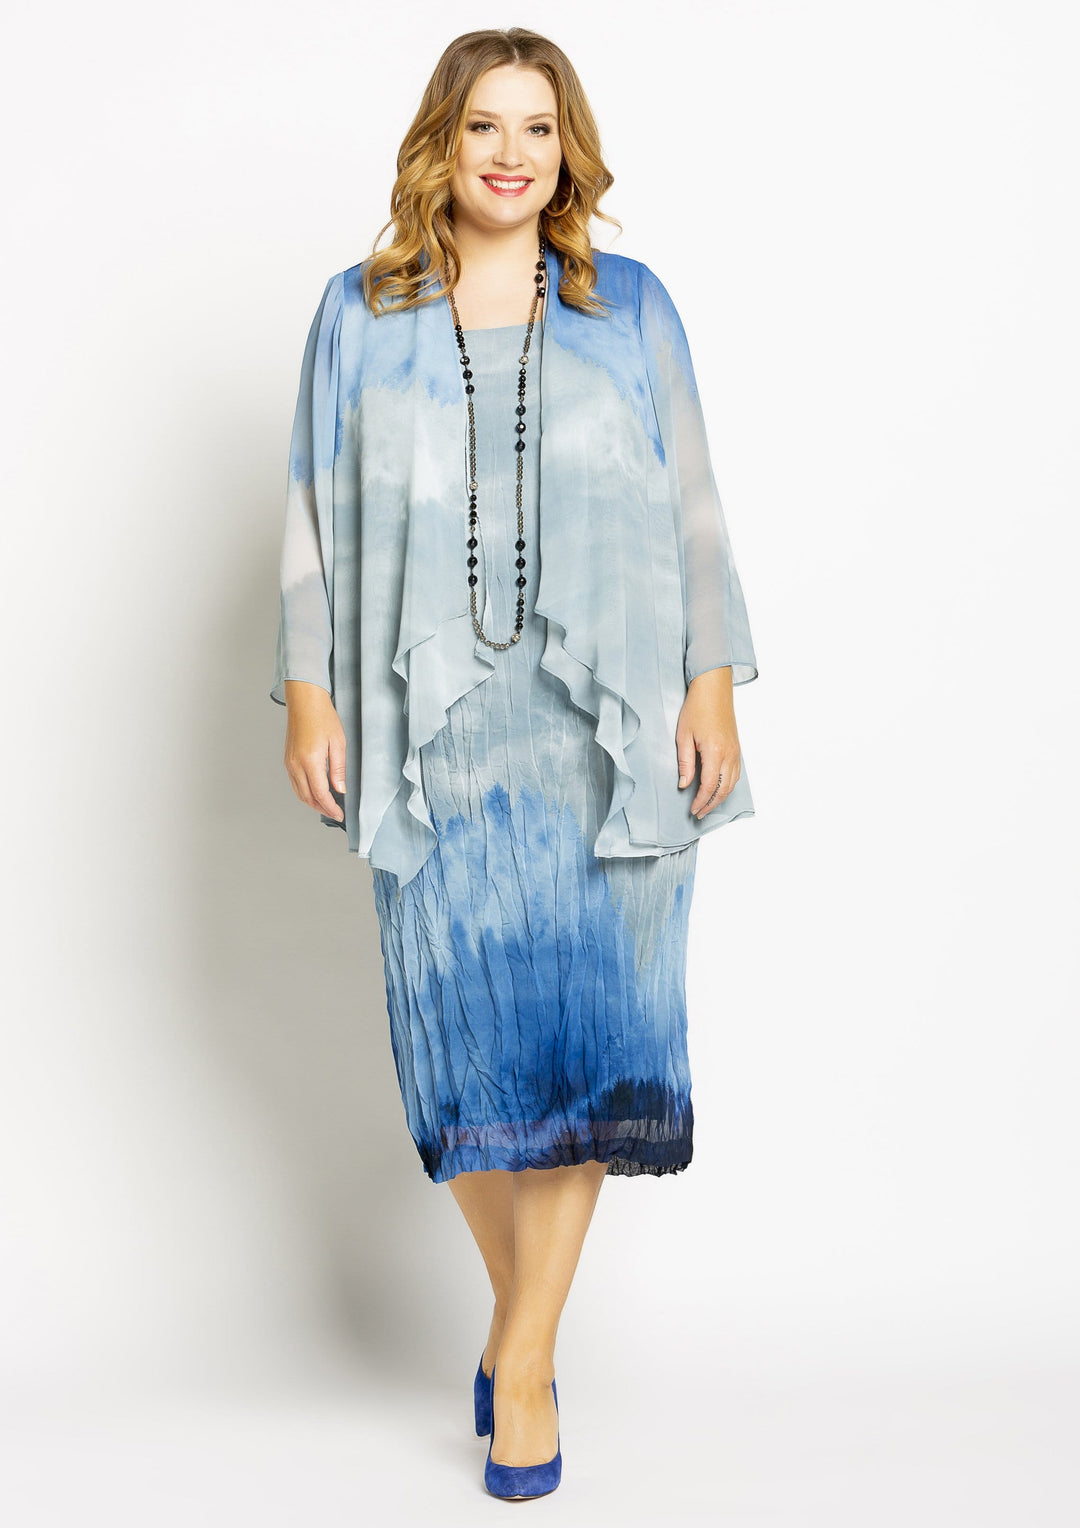 Blue Ombre Crushed Dress